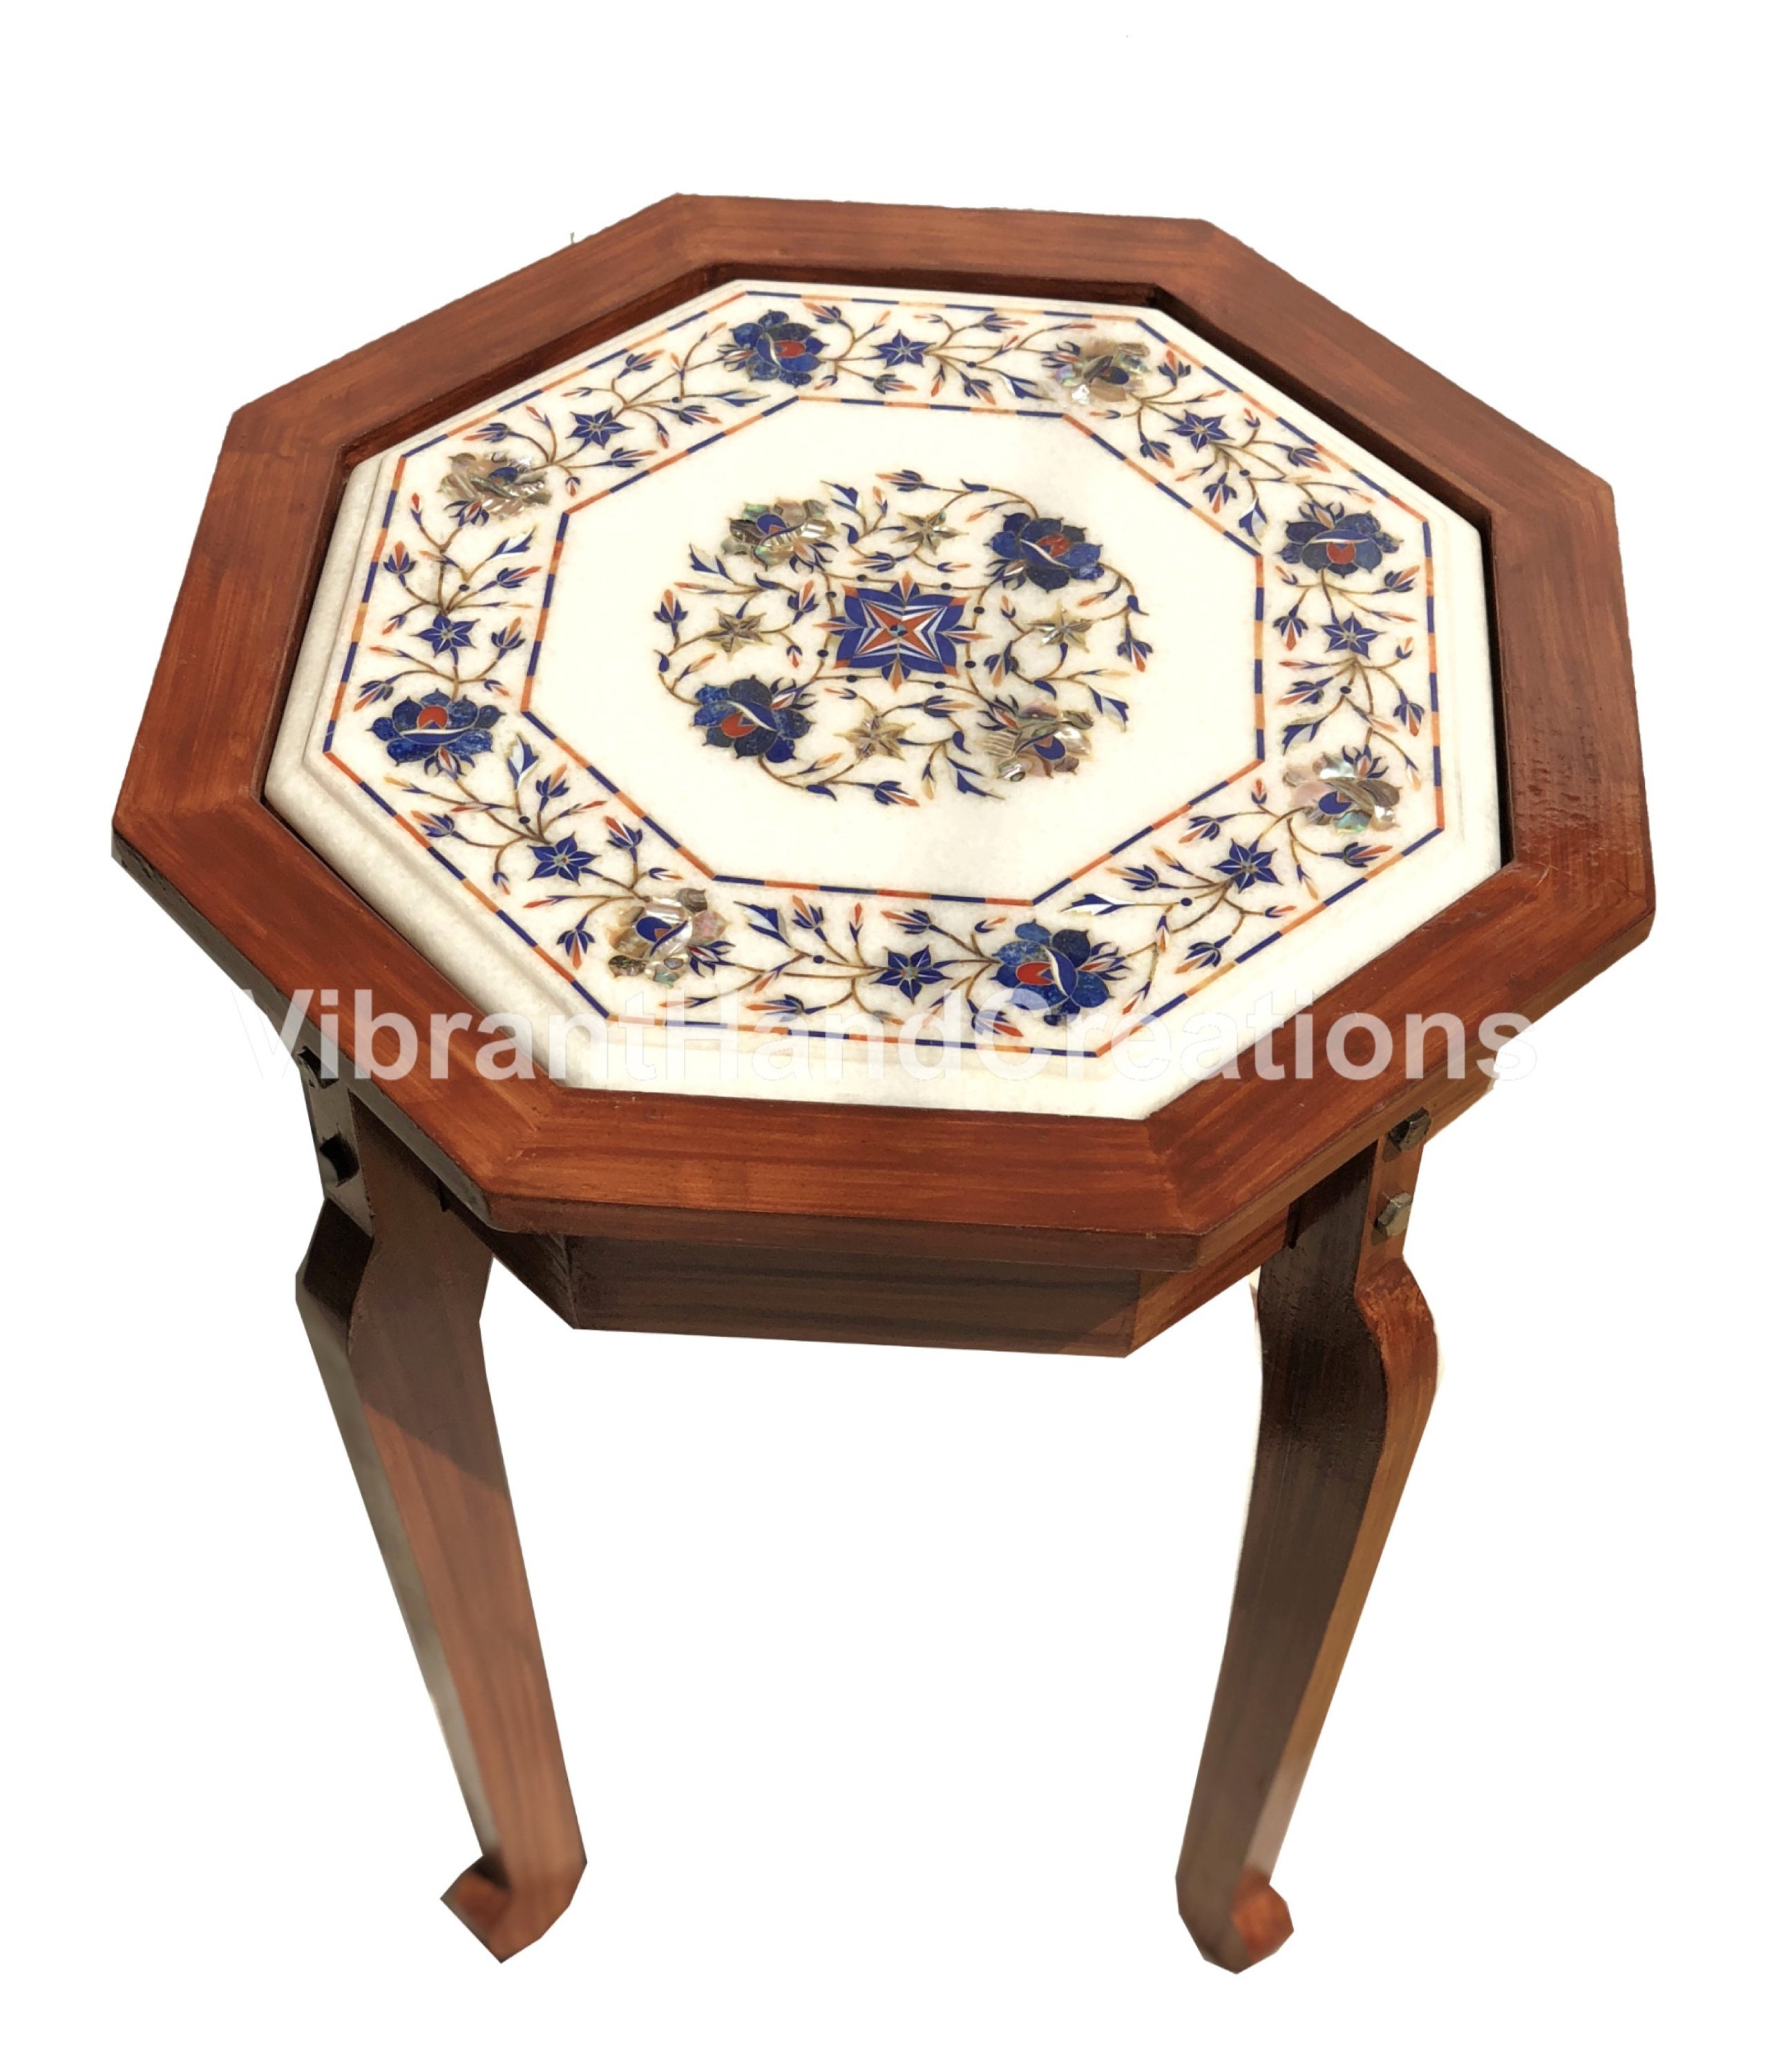 Details about   12" White Marble Table Top  Coffee Center Inlay Lapis Handmade Decor G931 